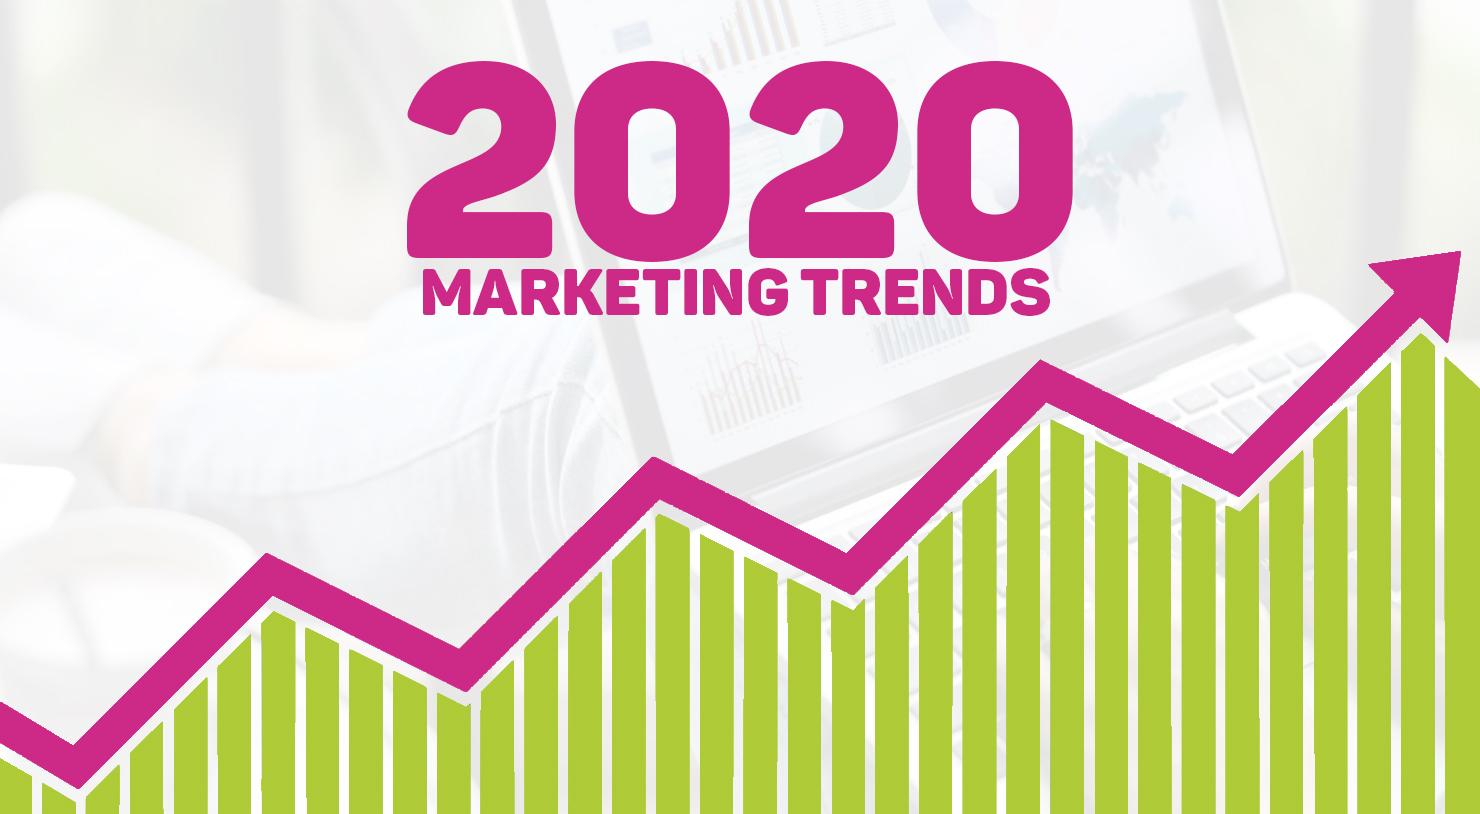 Biggest Marketing trends to look out for in 2020